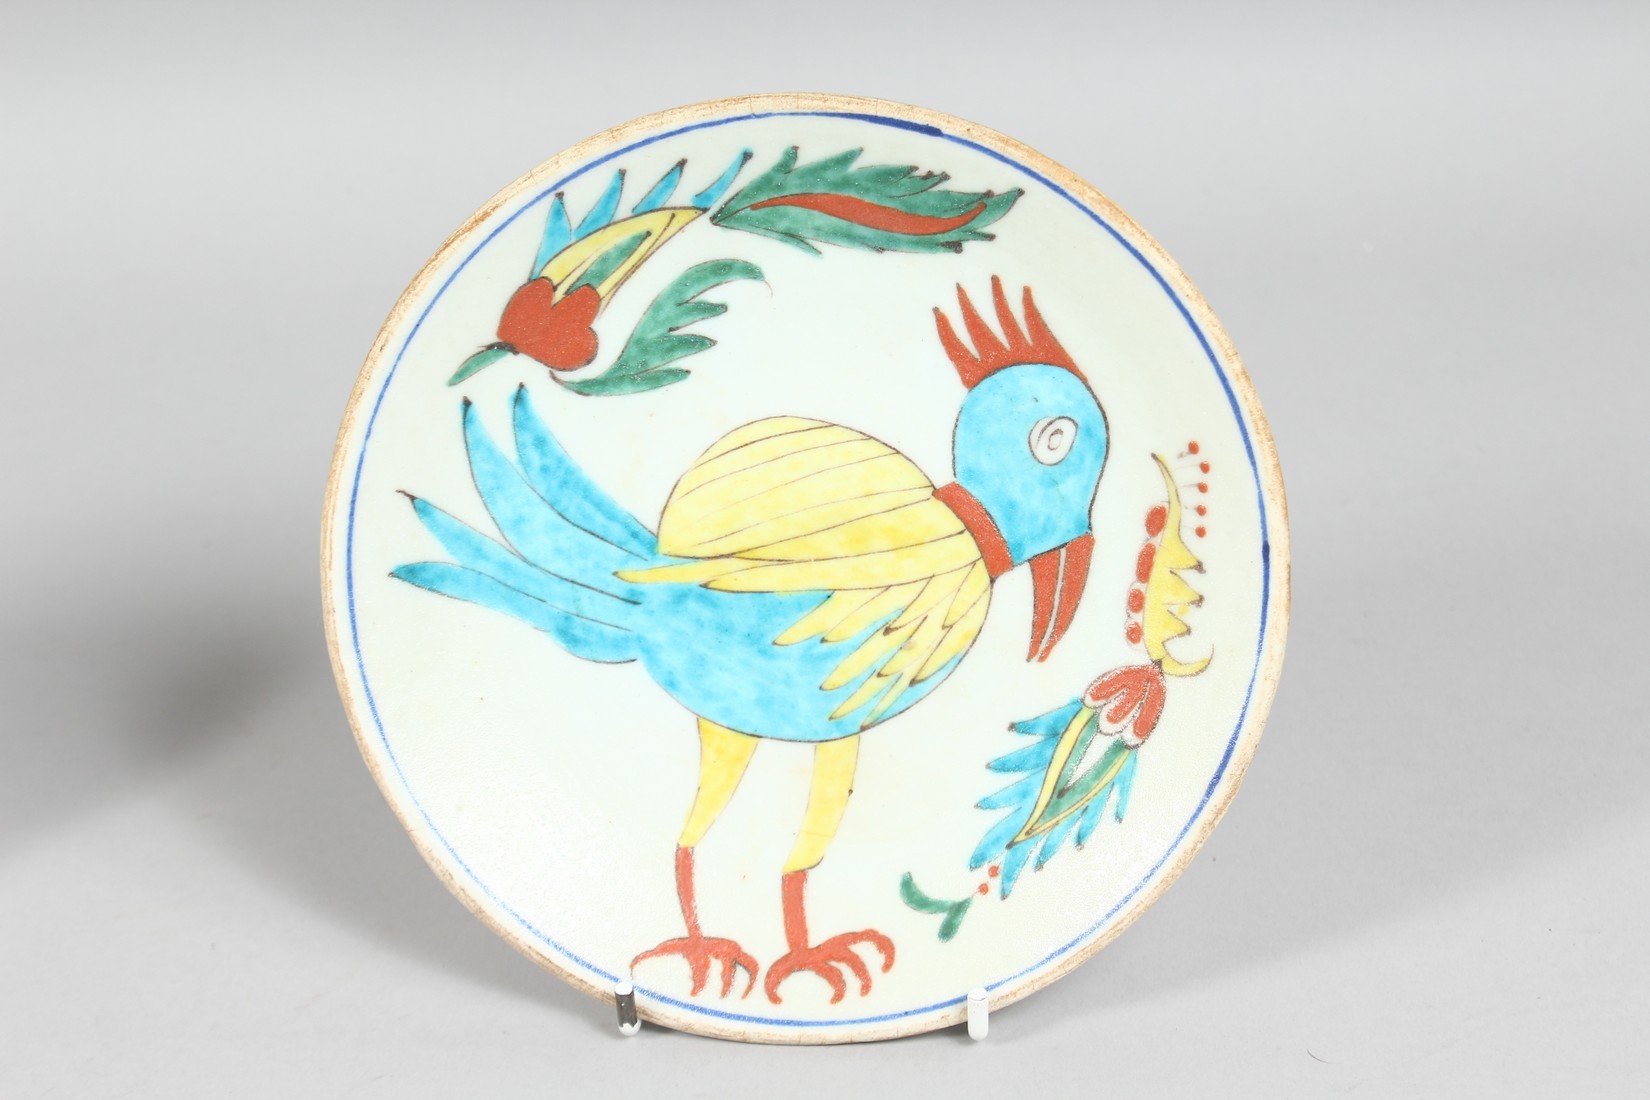 TWO TURKISH KUTAHYA GLAZED POTTERY DISHES, one painted with a figure, the other with a bird, each - Image 3 of 4